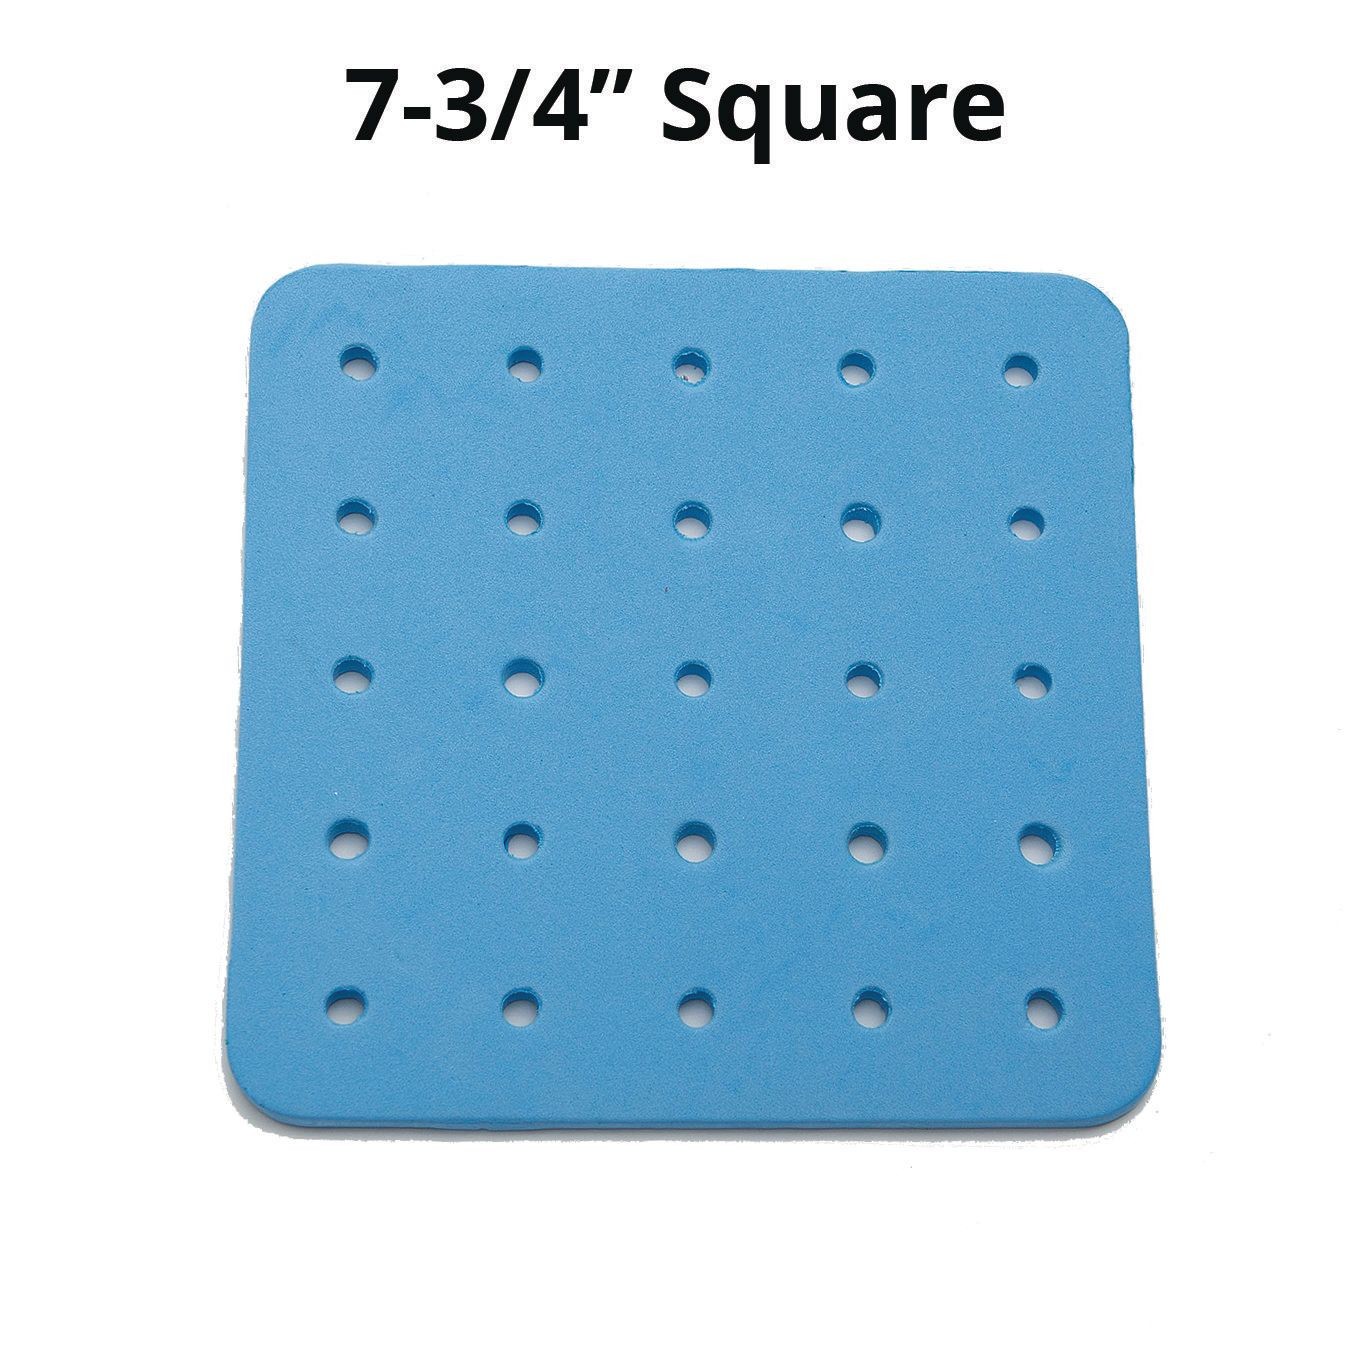 Buy 25 Hole Jumbo Hold-Tight Pegboard at S&S Worldwide